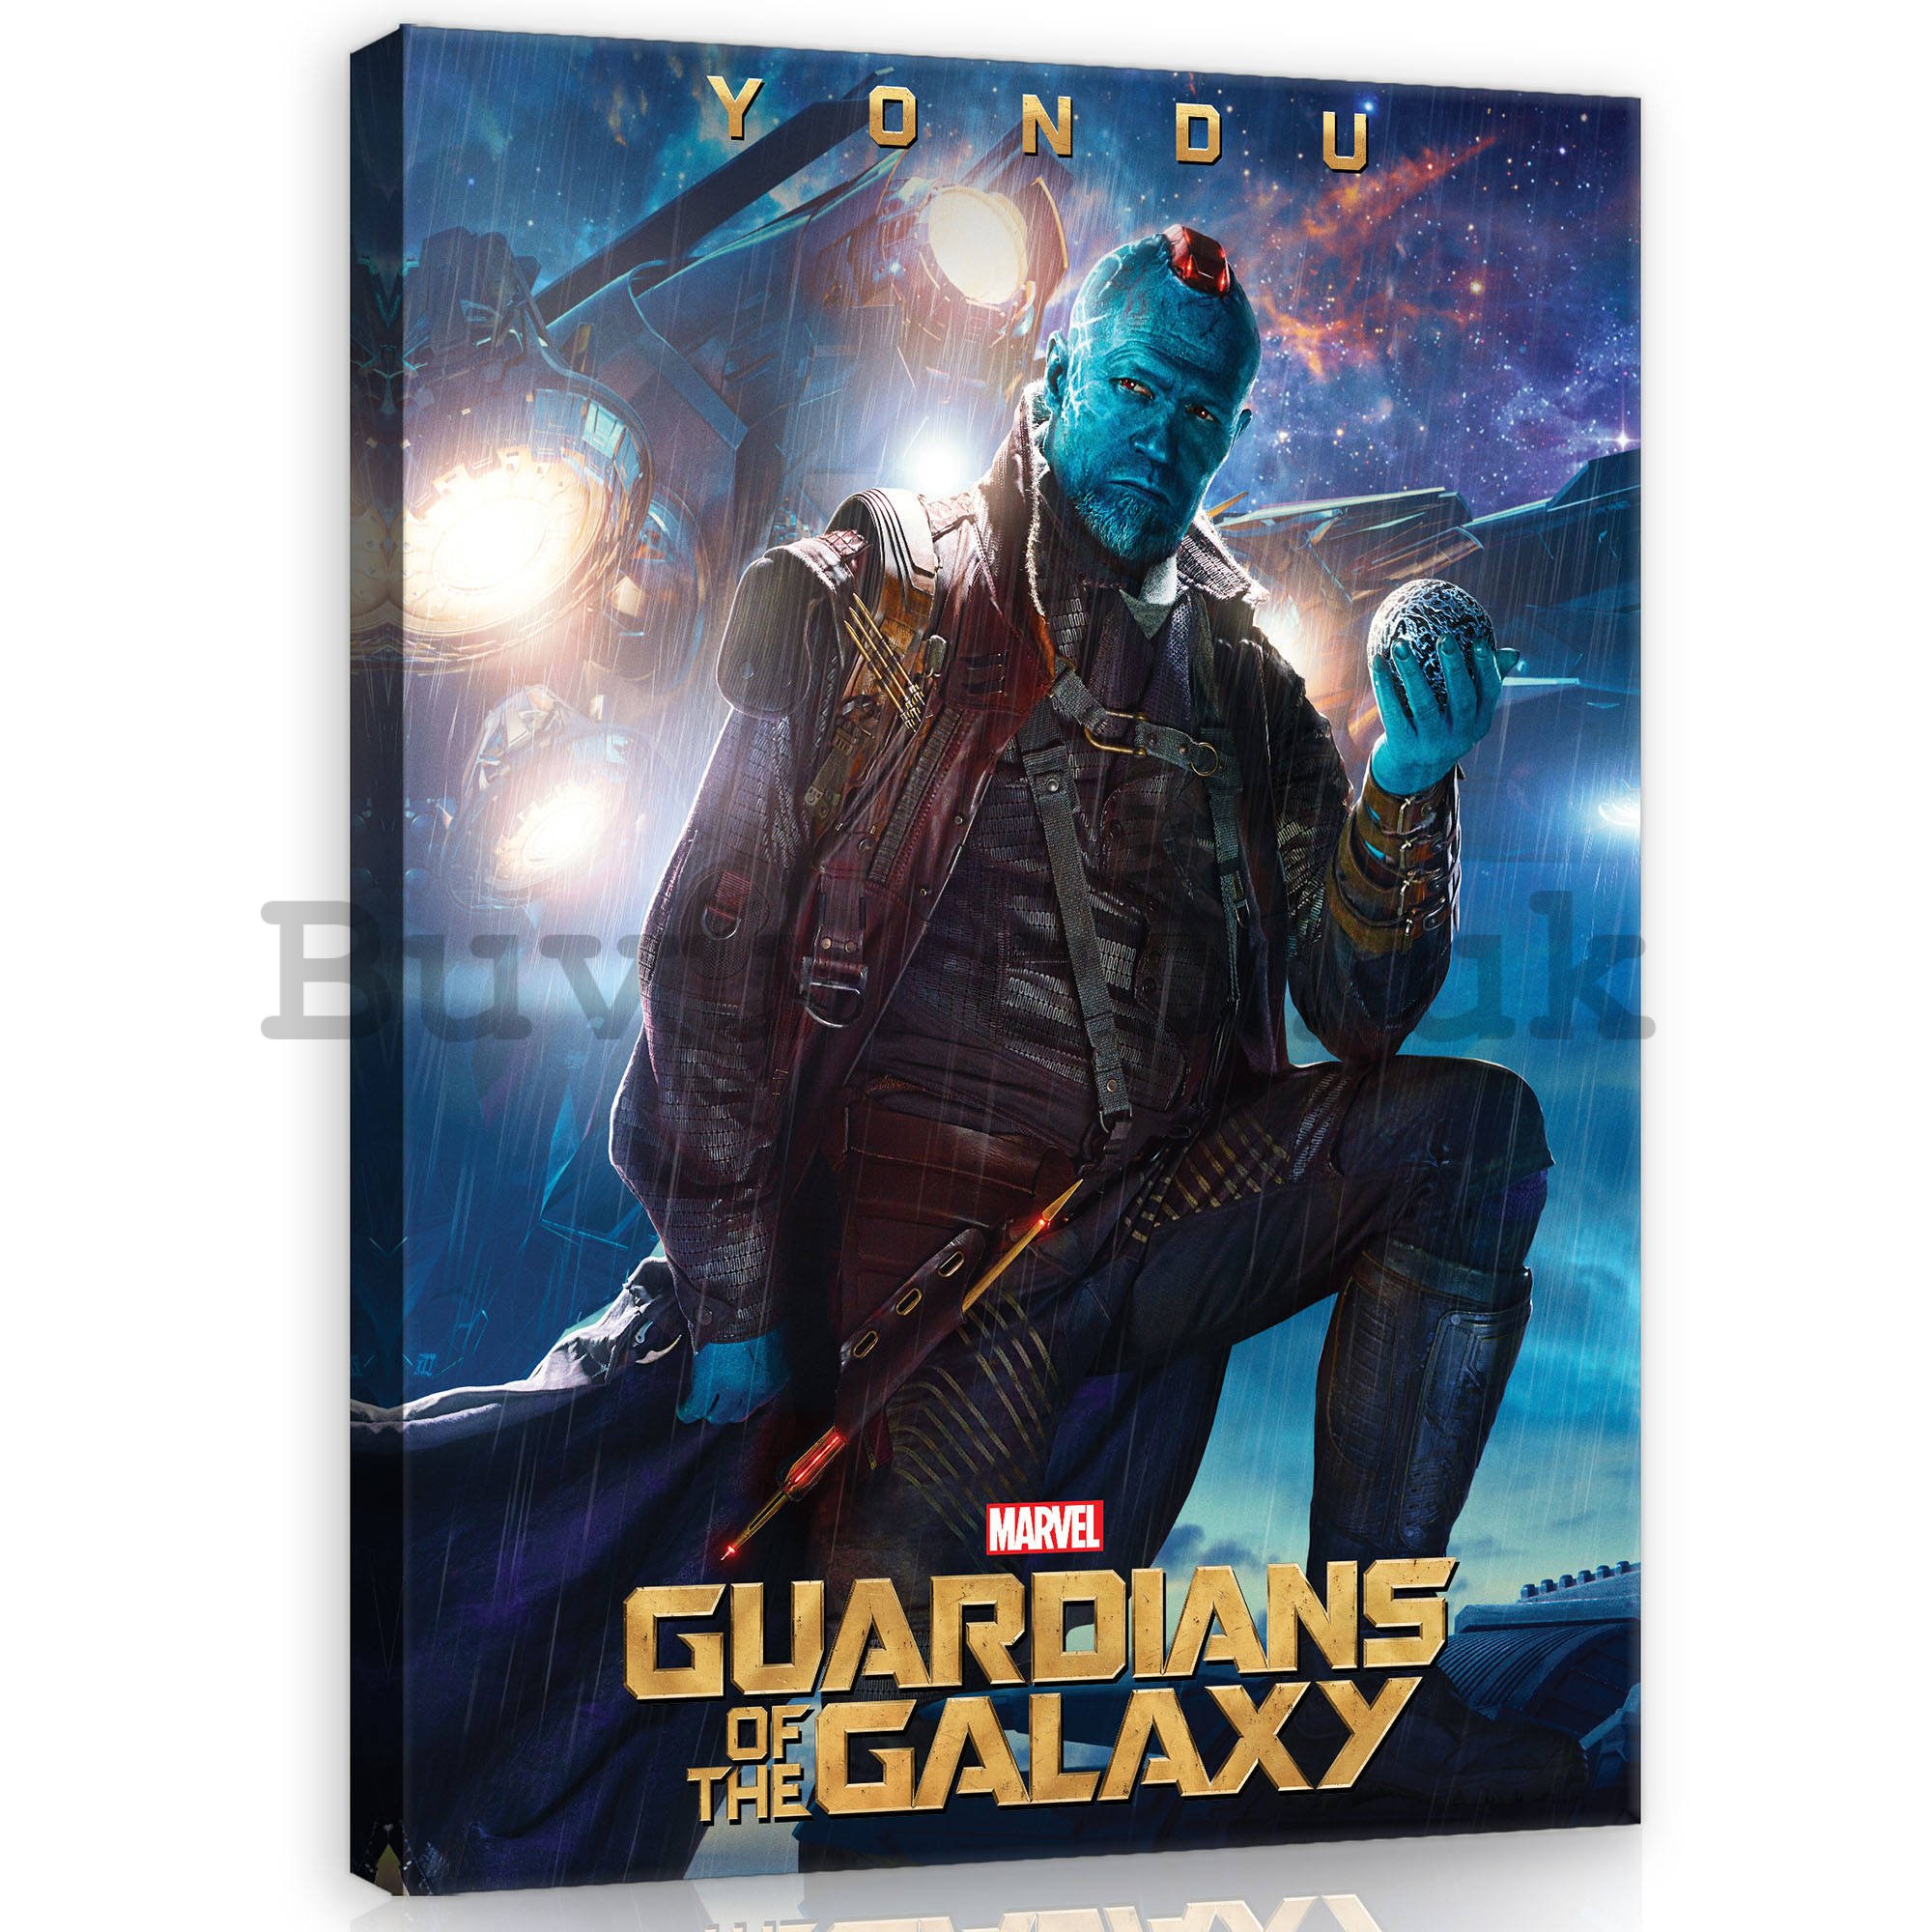 Painting on canvas: Guardians of The Galaxy Yondu - 60x80 cm